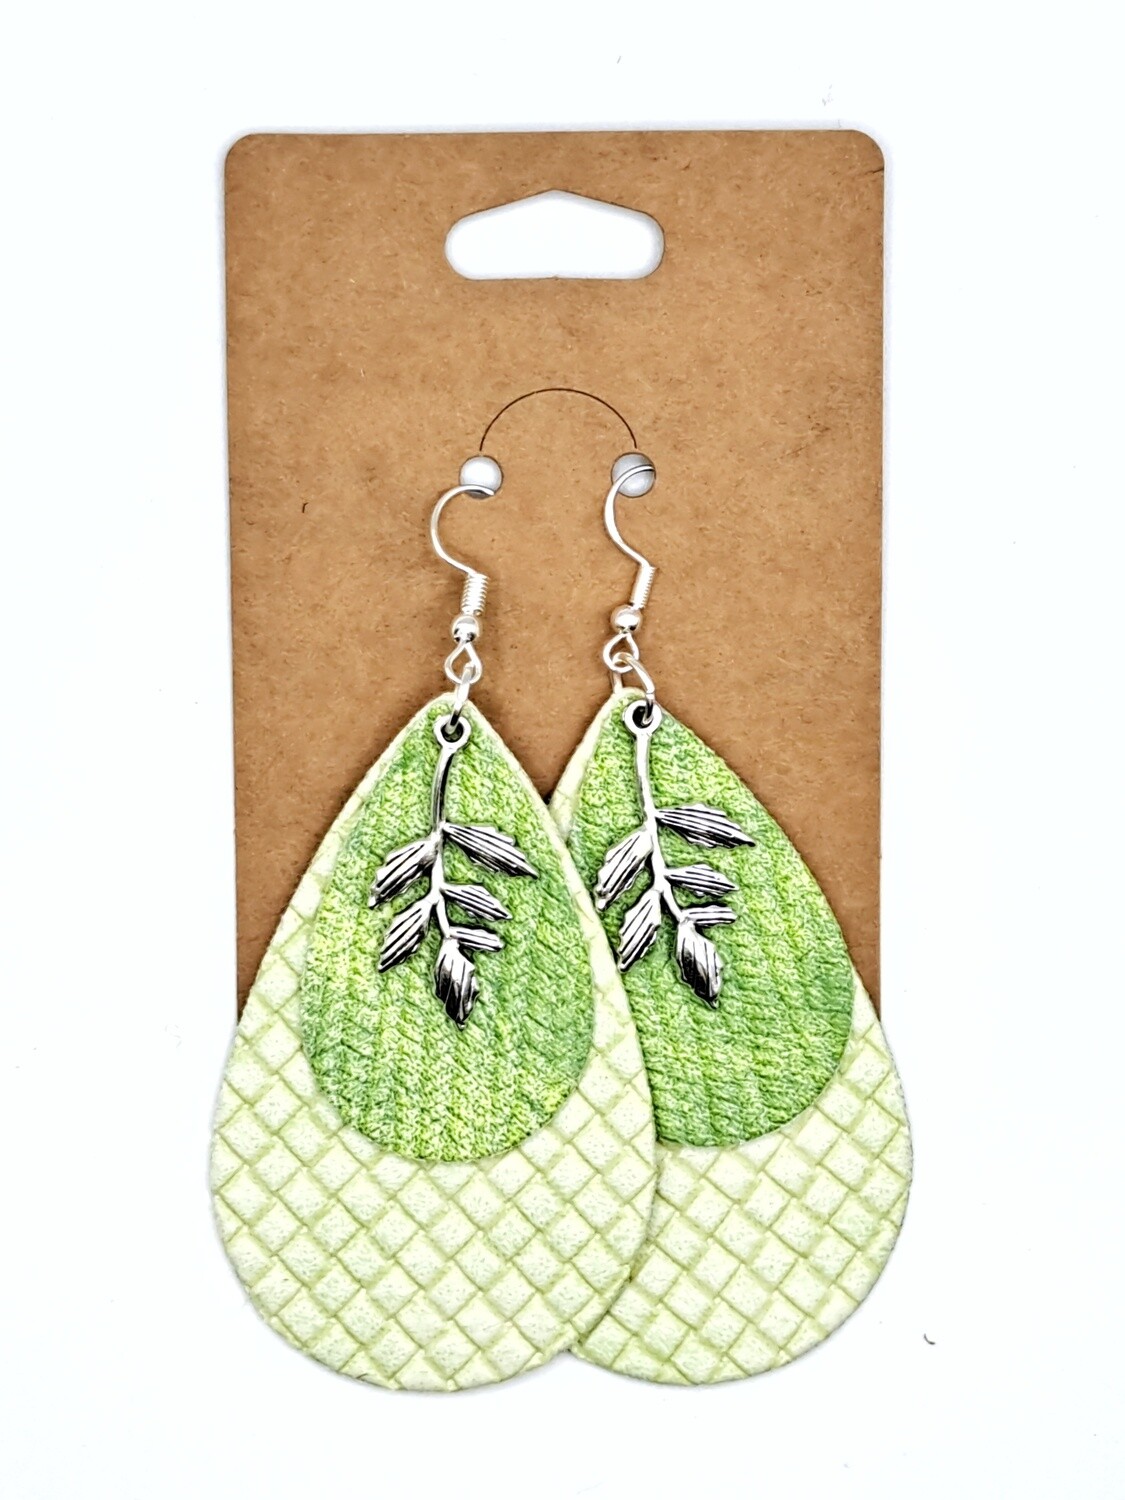 Handmade Layered Green Faux Leather Teardrops with Silver Leaf Charms Earrings #1